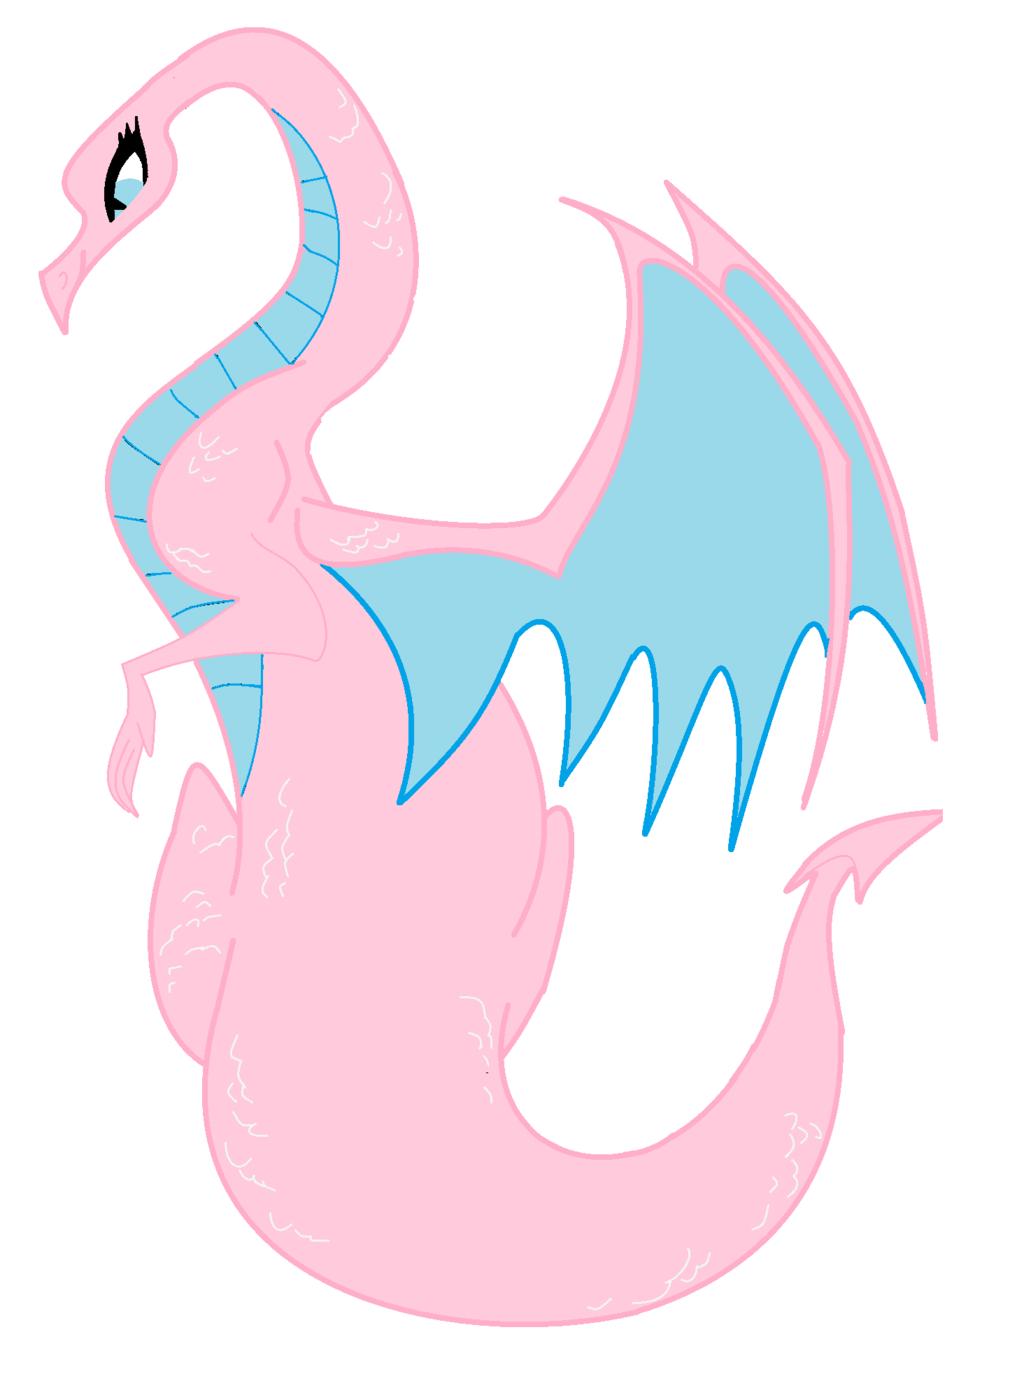 Female Dragon Pictures - ClipArt Best